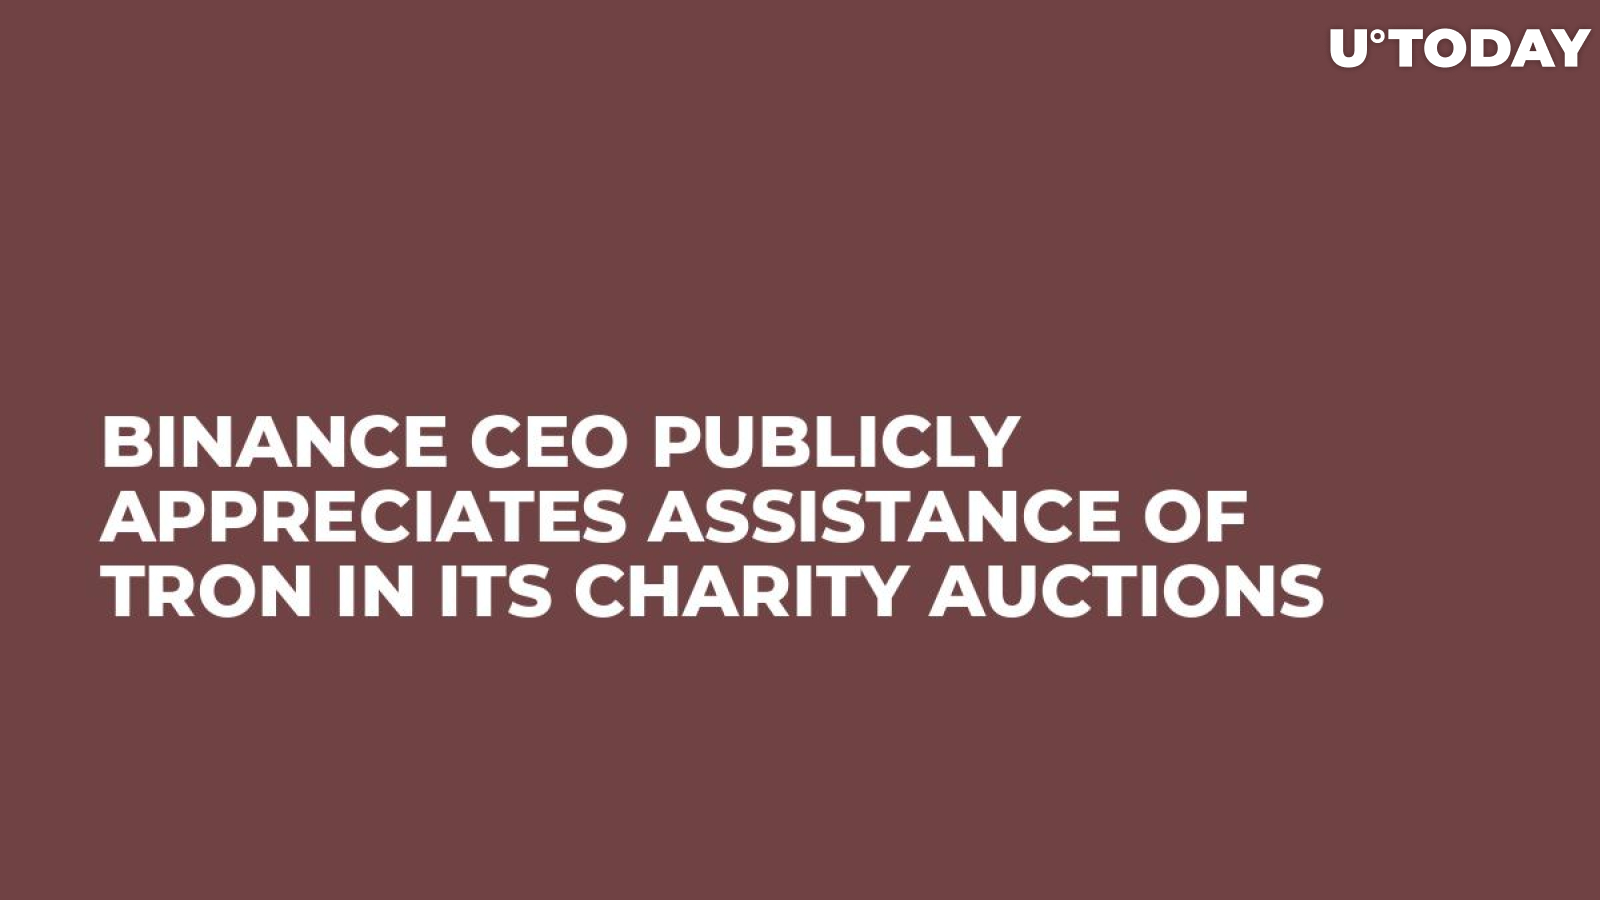 Binance CEO Publicly Appreciates Assistance of TRON in Its Charity Auctions